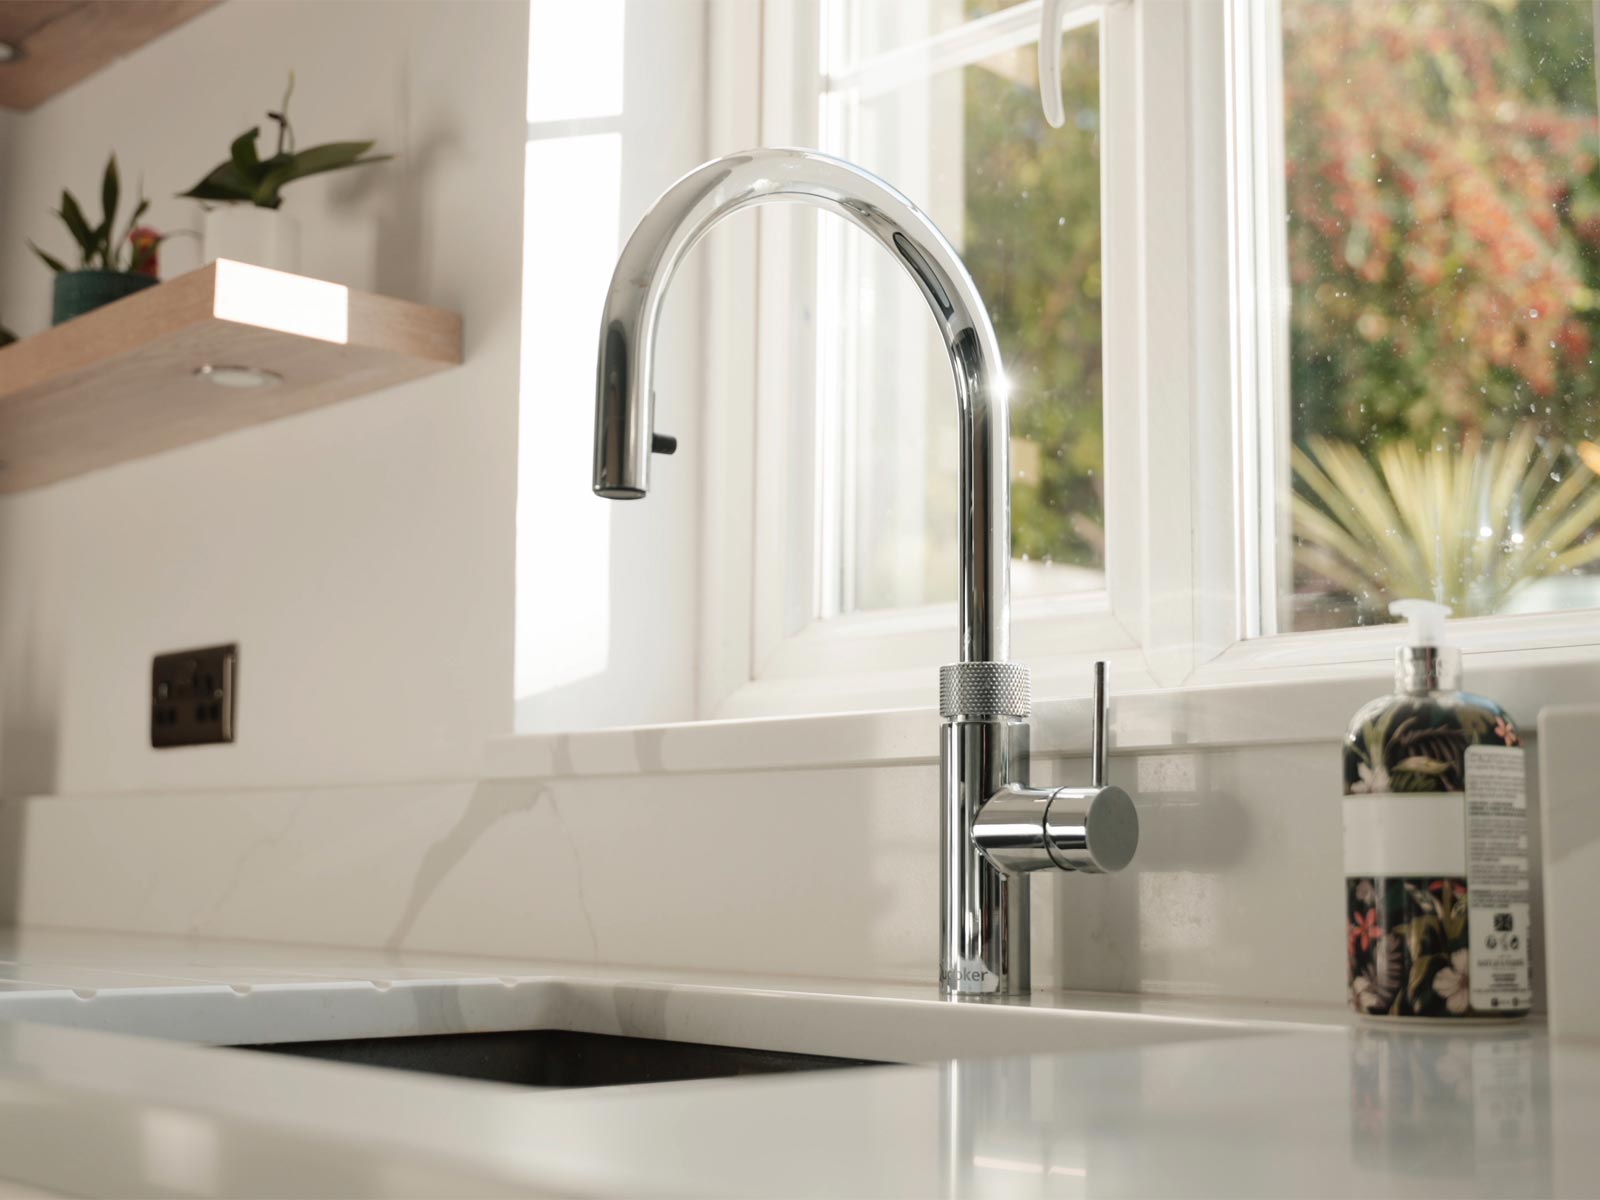 A white handleless kitchen worktop featuring a boiling water tap